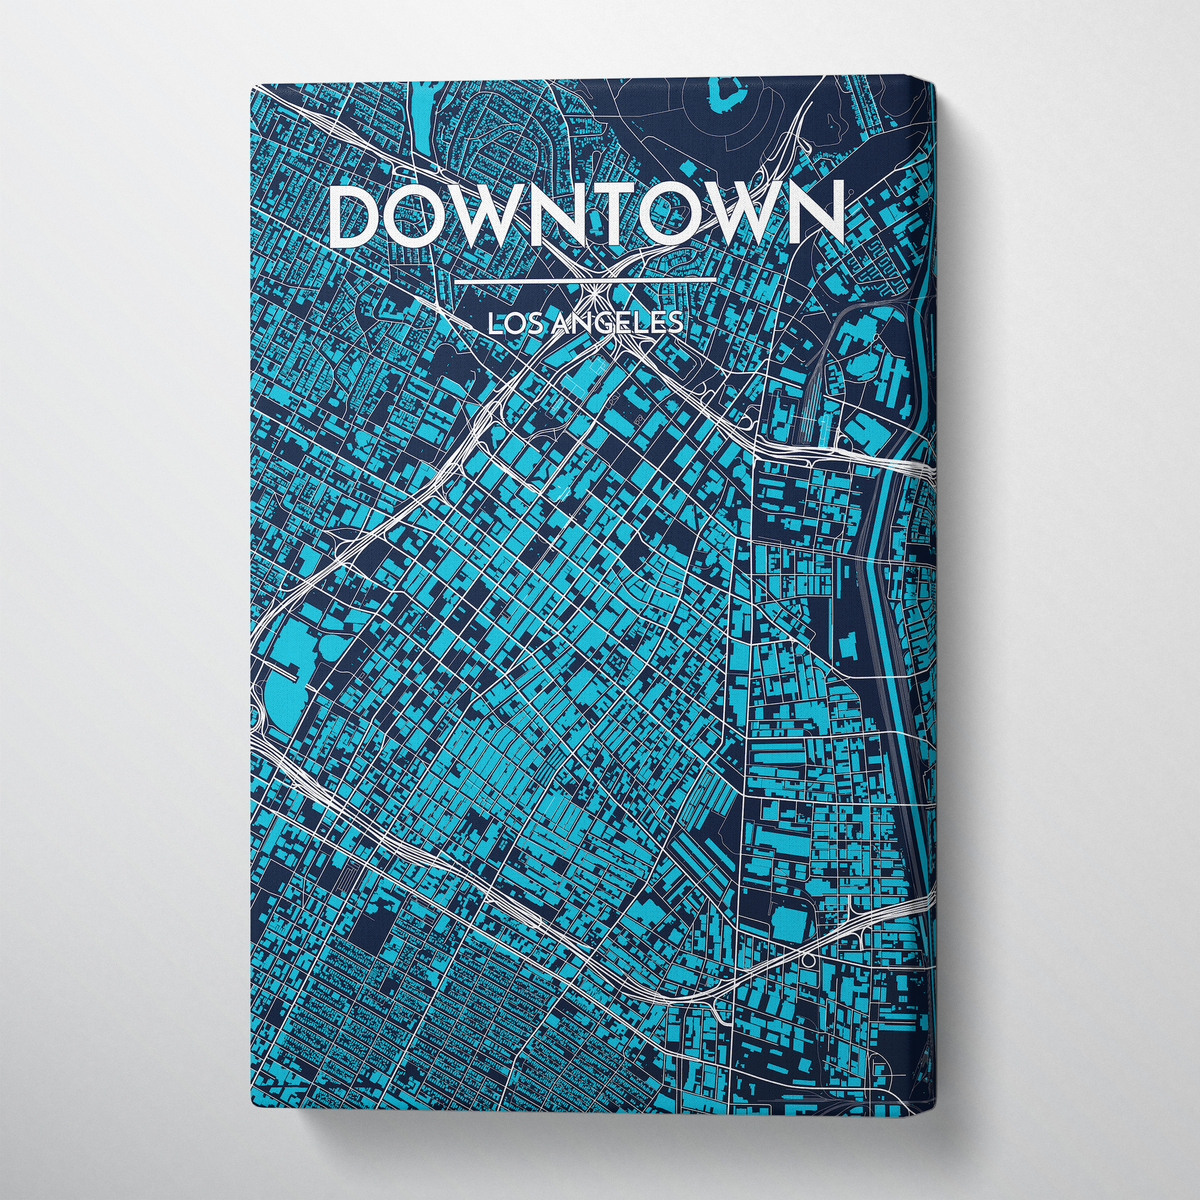 Los Angeles - Downtown City Map Canvas Wrap - Point Two Design